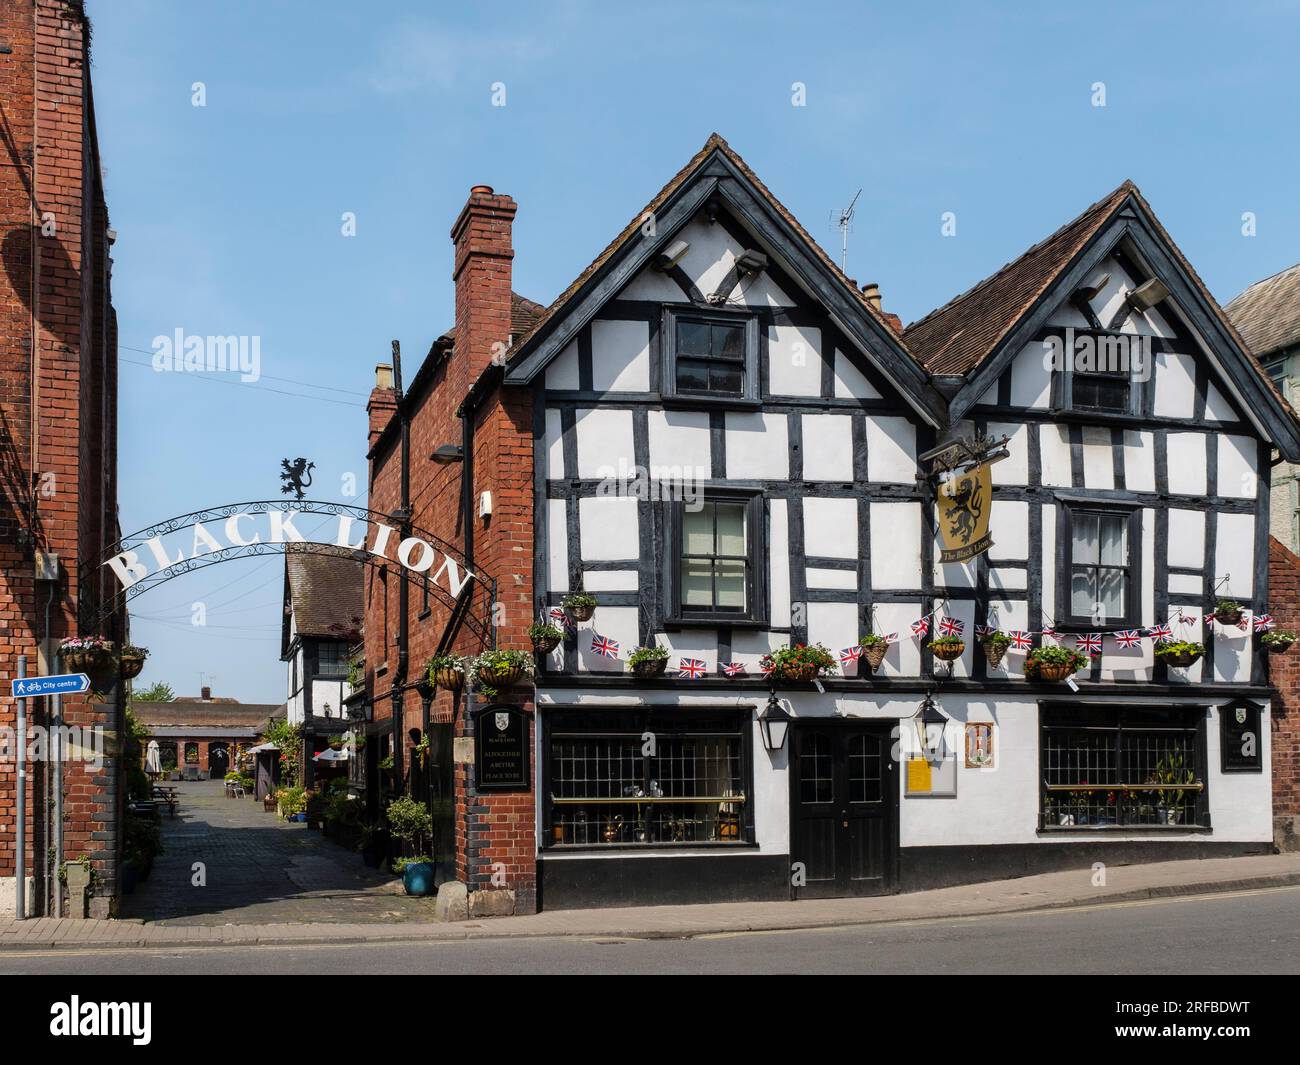 The Black Lion pub in black and white timbered building. Hereford, Herefordshire, England, UK, Britain Stock Photo